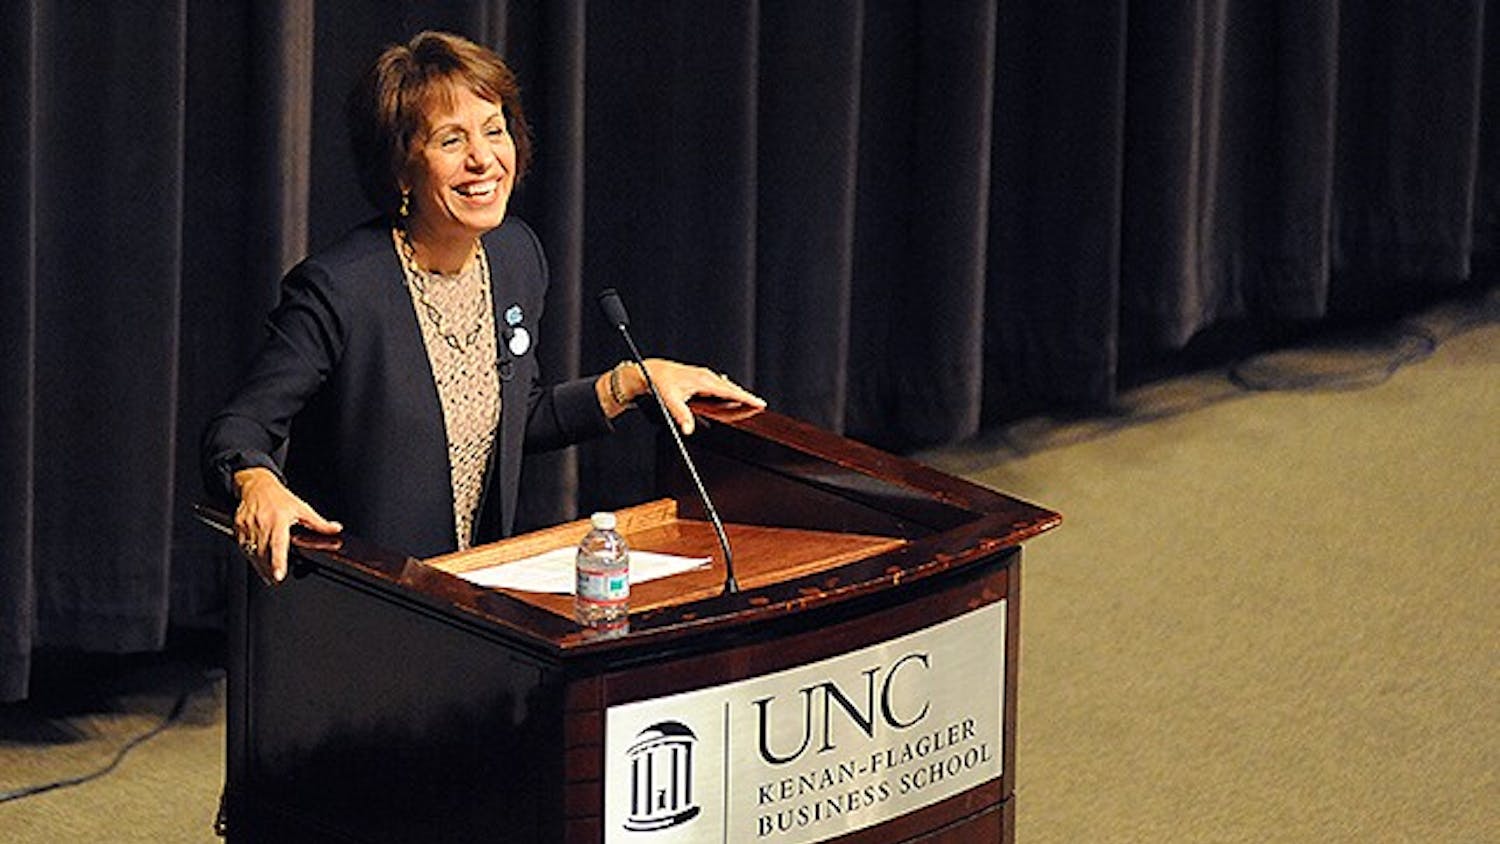 Chancellor Carol L. Folt spoke about the future of UNC and her plans to make changes as a part of Dean's Speaker Series at Koury Auditorium at the UNC Kenan-Flagler Business School on Monday night. "UNC may be ground zero for the future of higher education in America," said Folt. 